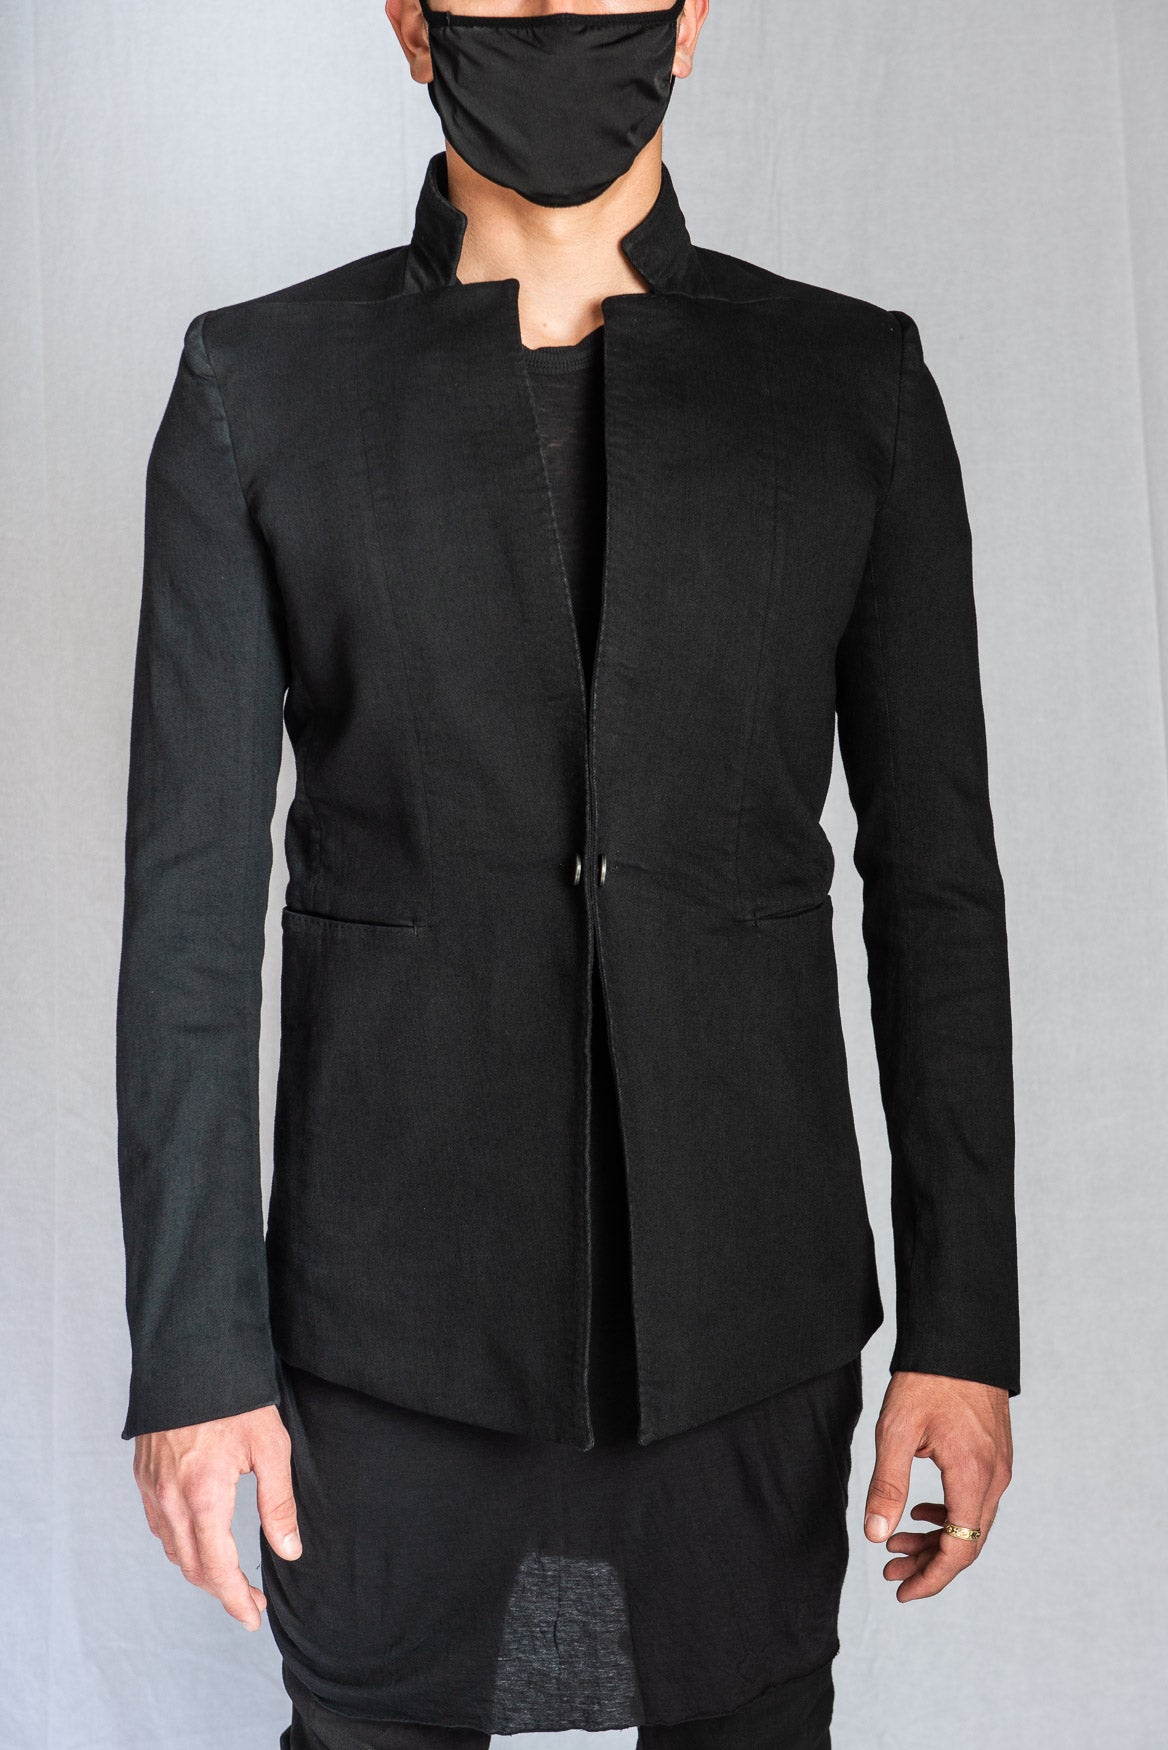 Black Resin Dyed Stretch Cotton SUIT1